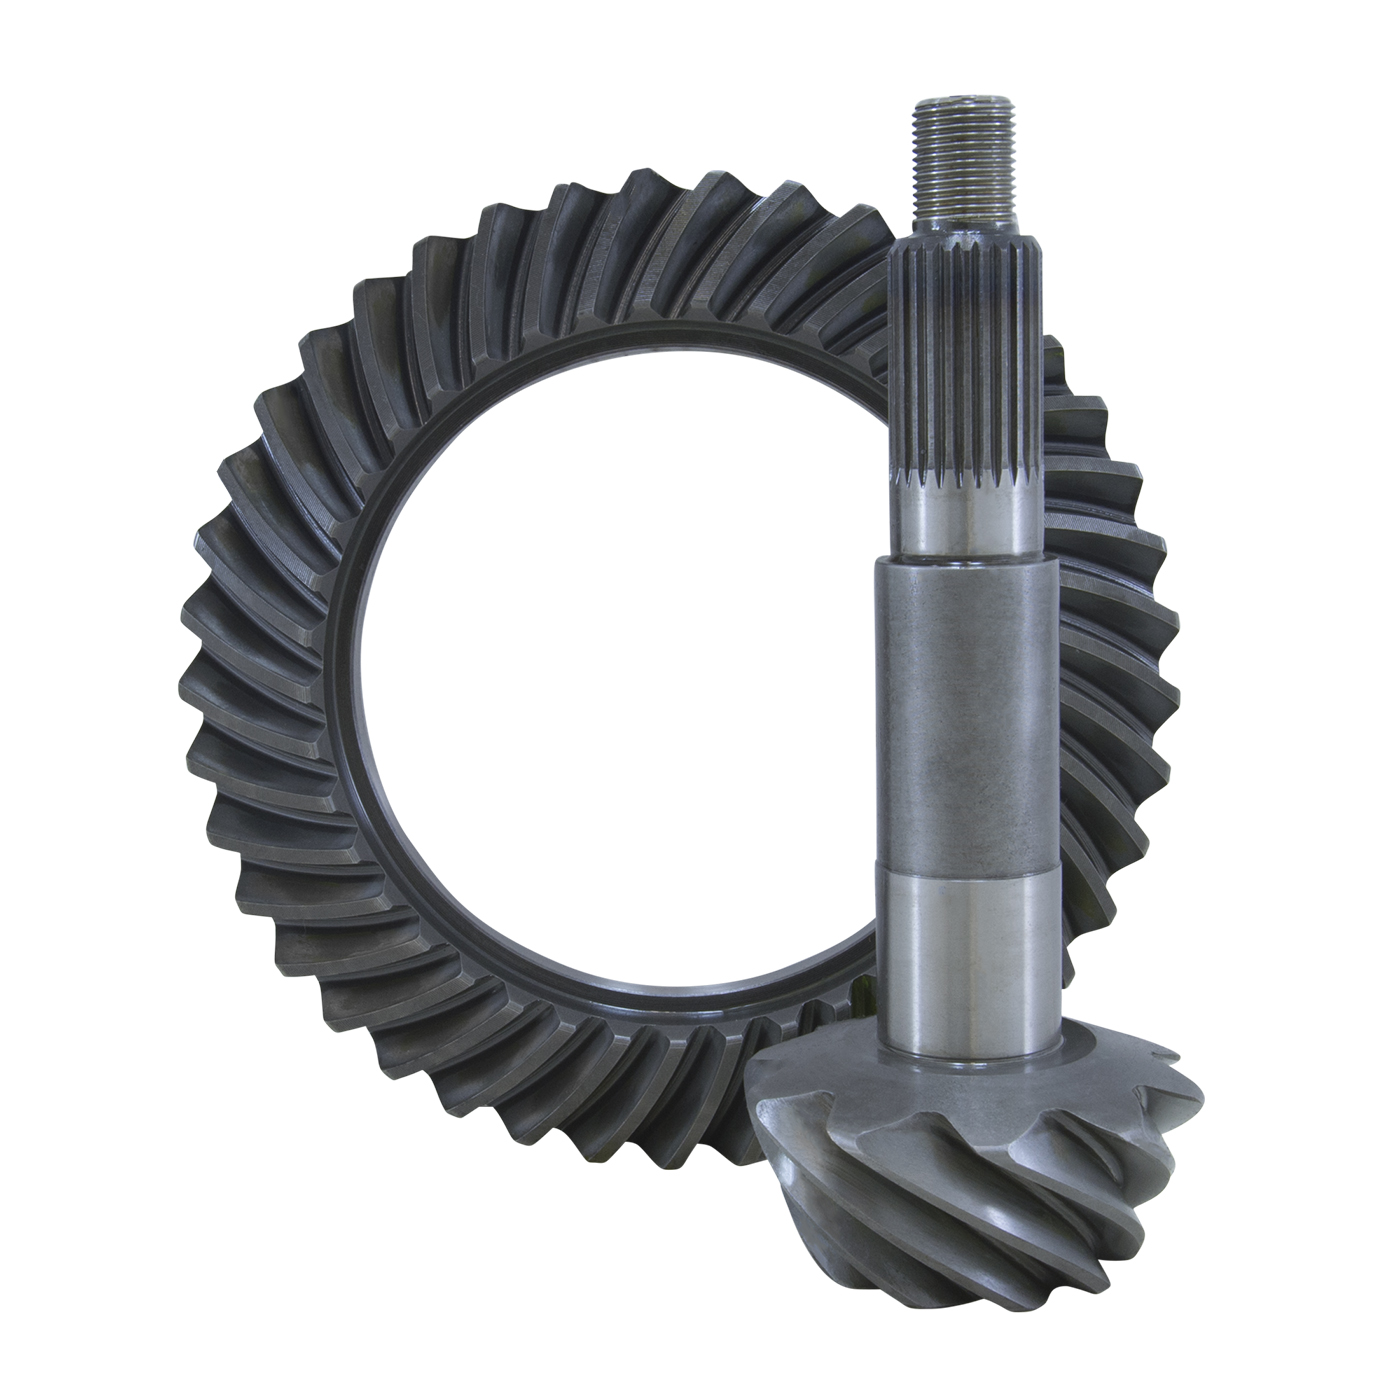 USA Standard replacement Ring & Pinion "thick" gear set for Dana 44, 4.88 ratio